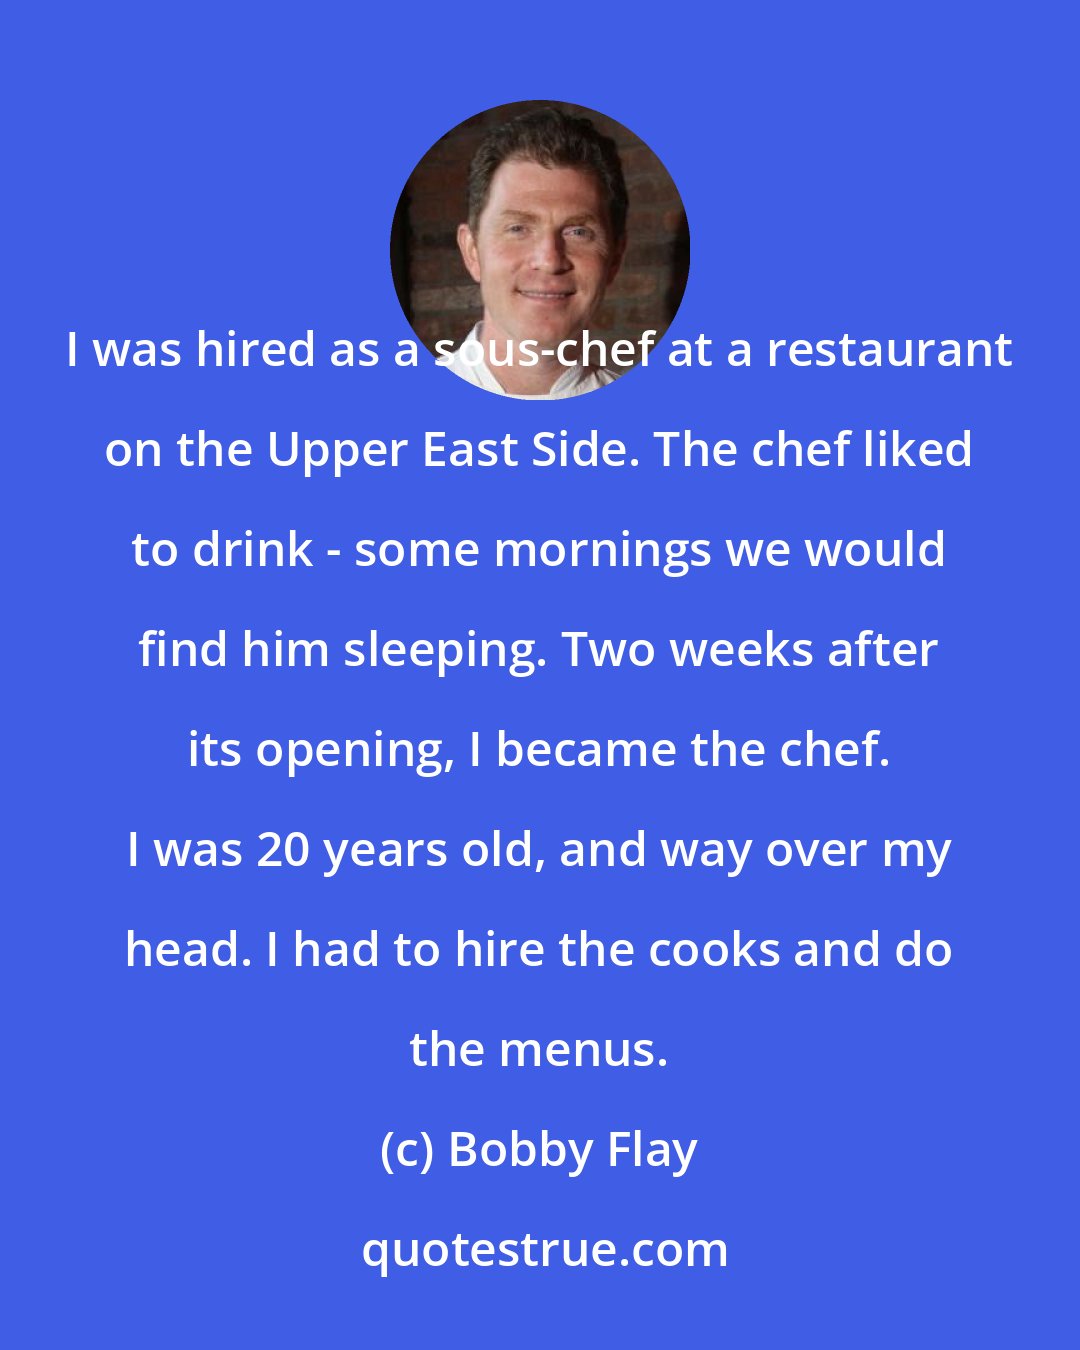 Bobby Flay: I was hired as a sous-chef at a restaurant on the Upper East Side. The chef liked to drink - some mornings we would find him sleeping. Two weeks after its opening, I became the chef. I was 20 years old, and way over my head. I had to hire the cooks and do the menus.